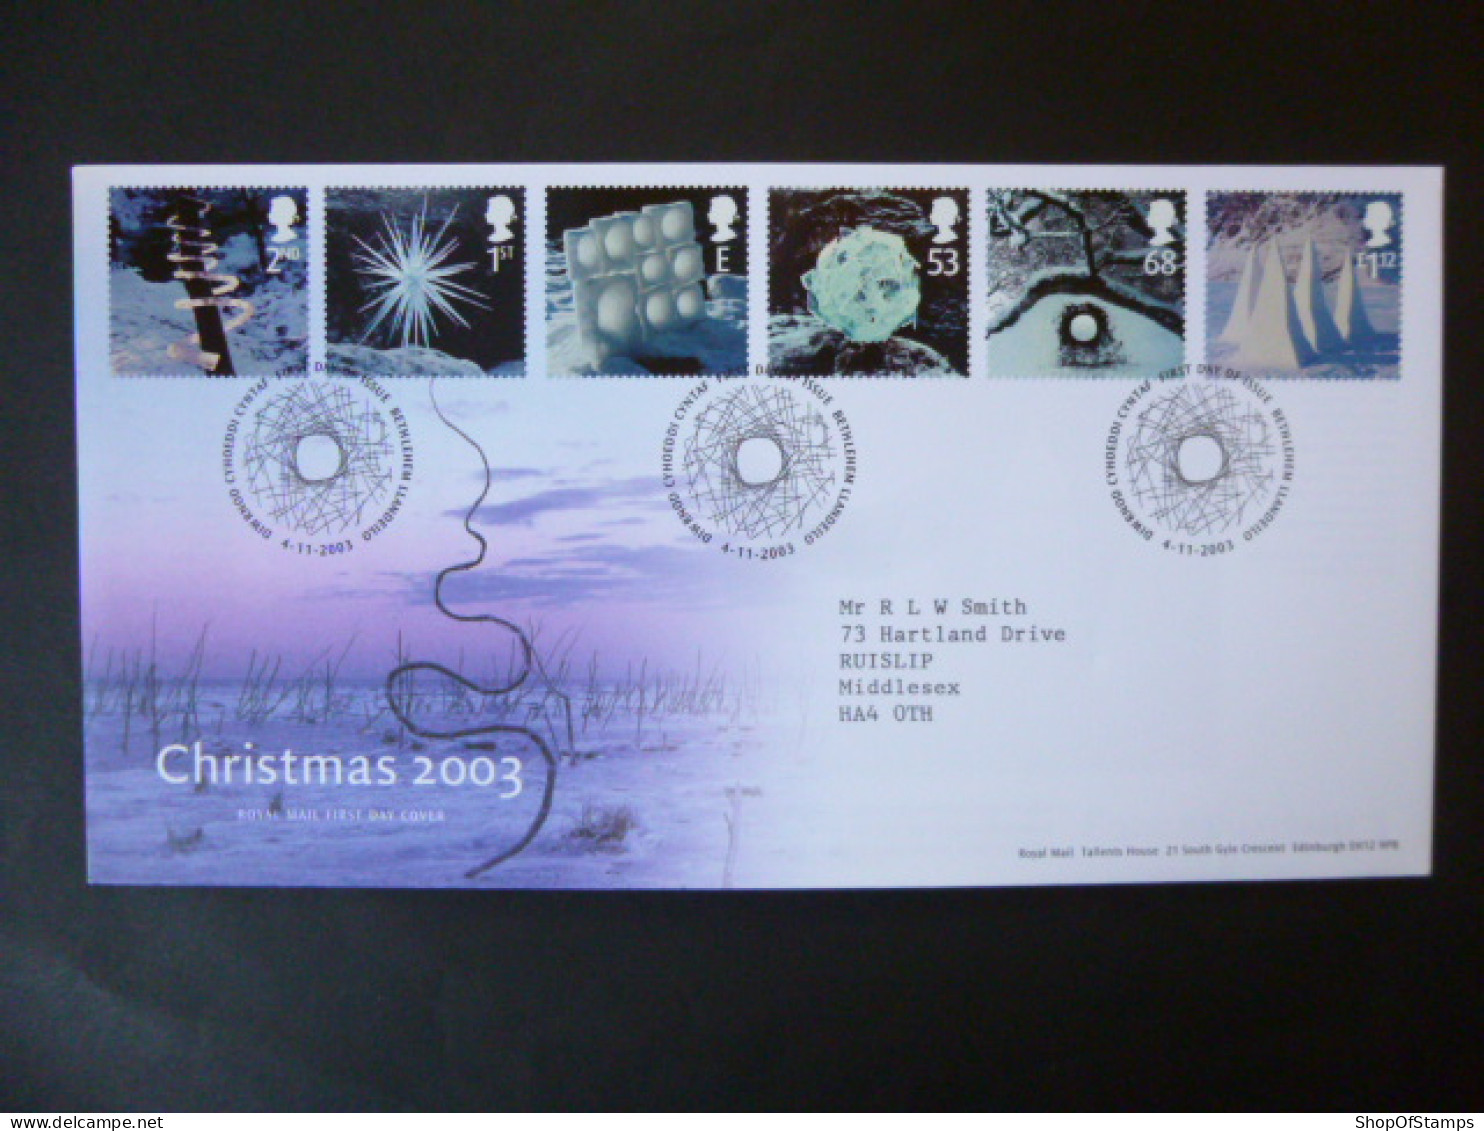 GREAT BRITAIN SG 2410-15 CHRISTMAS; ICE SCULPTURES BY ANDY GOLDSWORTHY FDC BETHLEHEM LLANDEILO - Unclassified